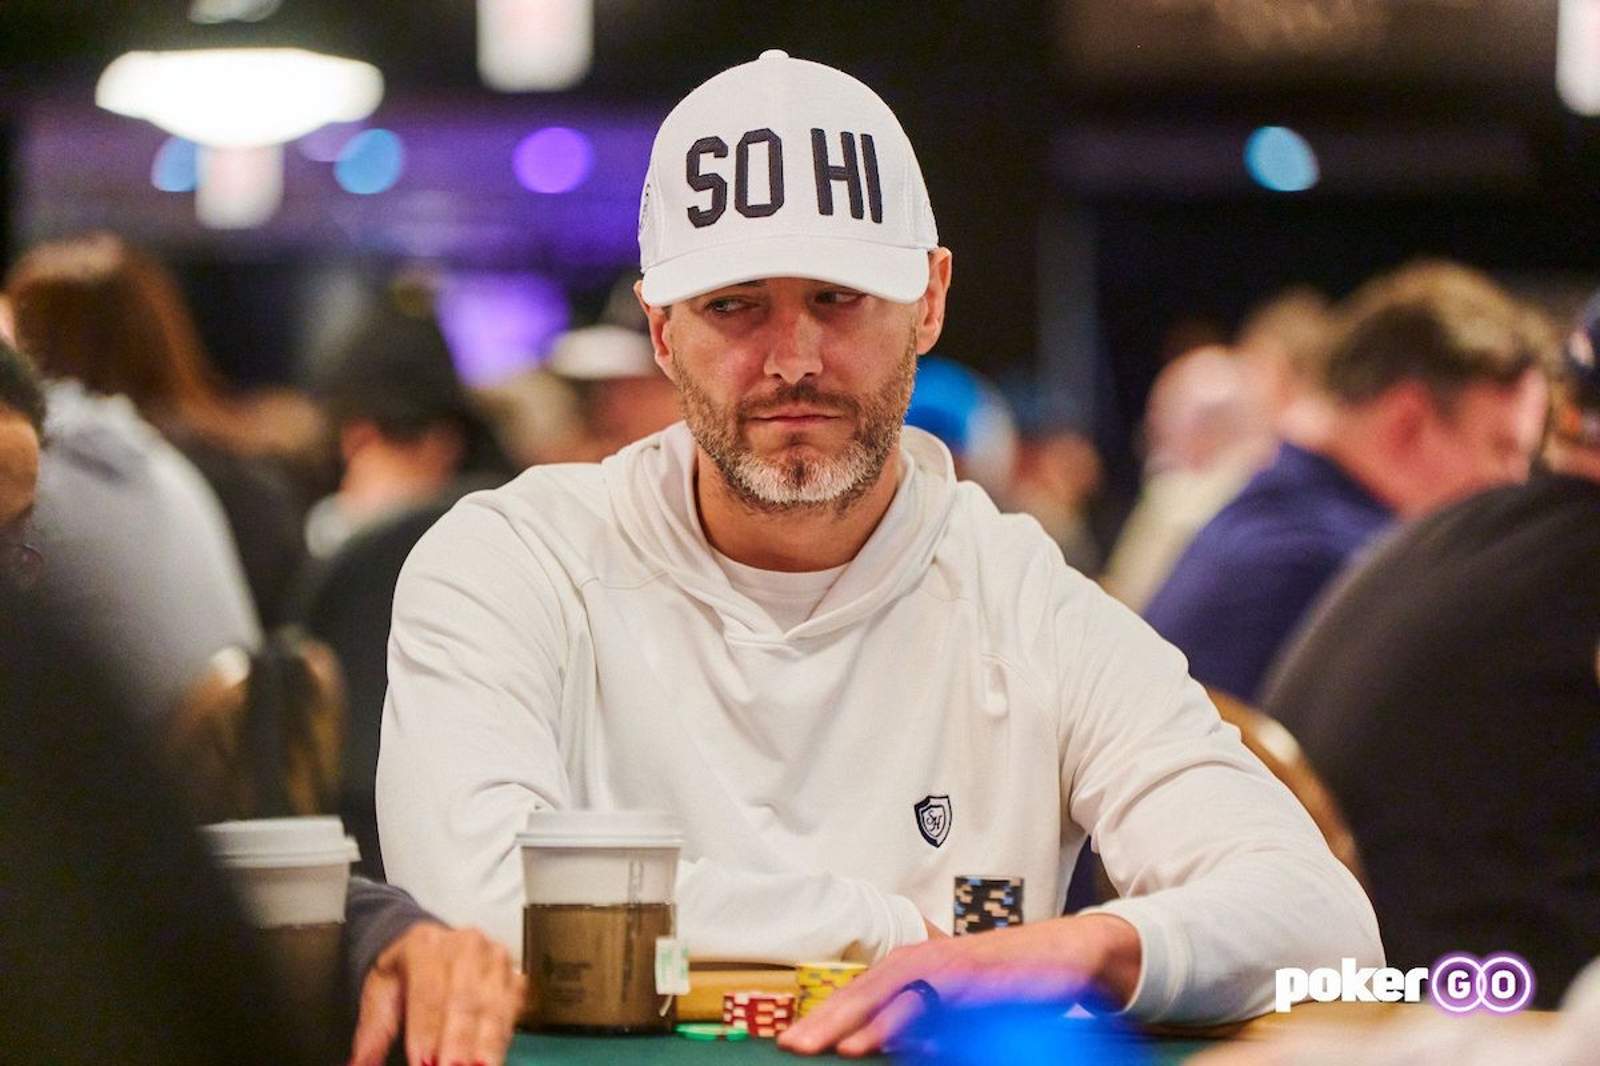 WSOP Day 35 Recap: Day 1b of Main Event Sees 1,245 Players Boost Field Further, Mystery Bounty Reaches Day 2